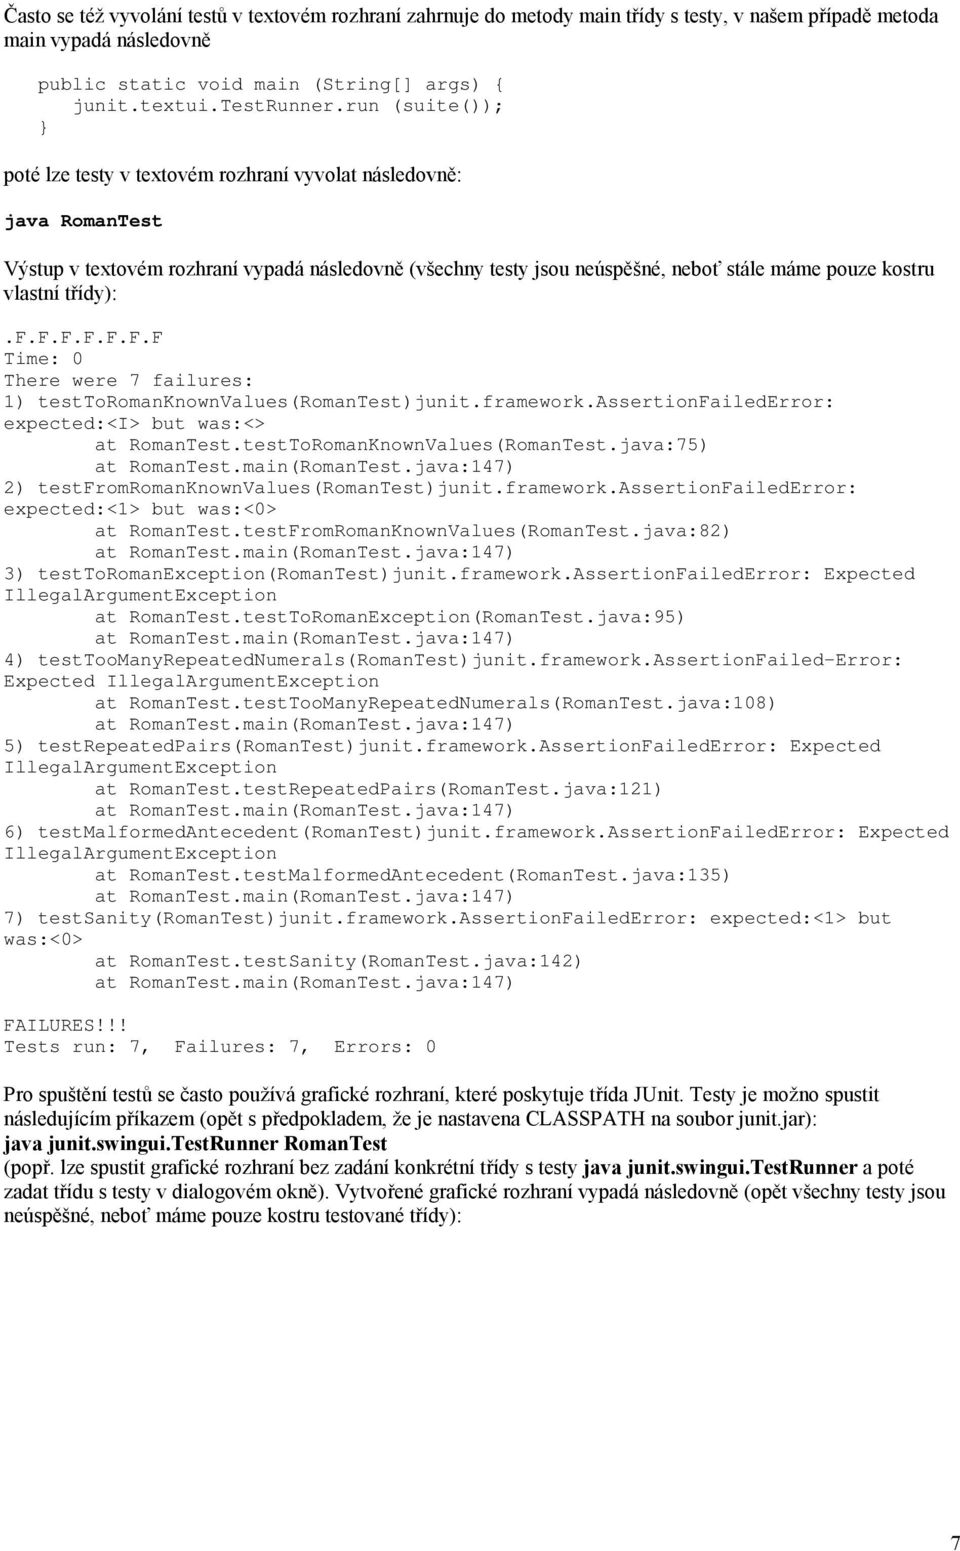 třídy):.f.f.f.f.f.f.f Time: 0 There were 7 failures: 1) testtoromanknownvalues(romantest)junit.framework.assertionfailederror: expected:<i> but was:<> at RomanTest.testToRomanKnownValues(RomanTest.